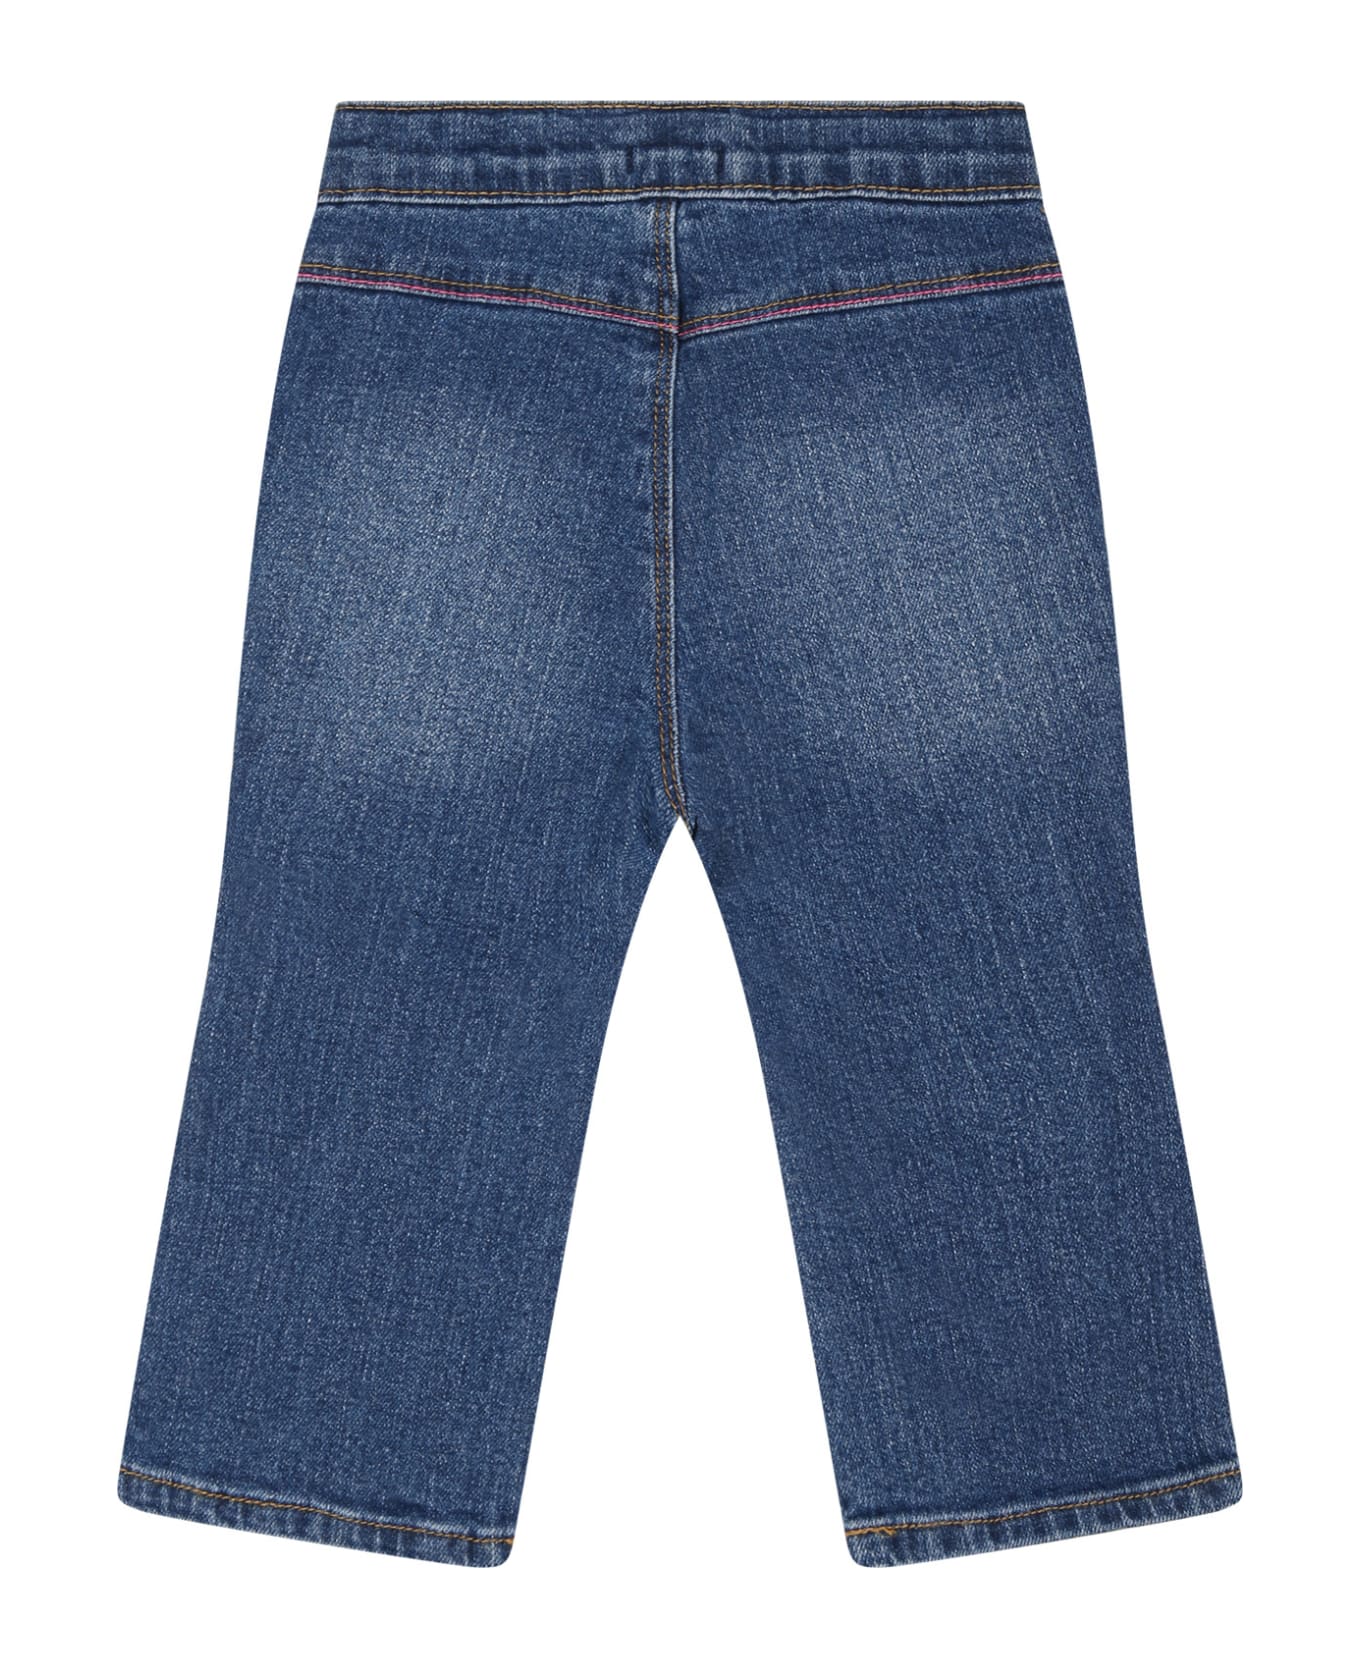 Billieblush Blue Jeans Pour Baby Girl With Logo - Denim ボトムス